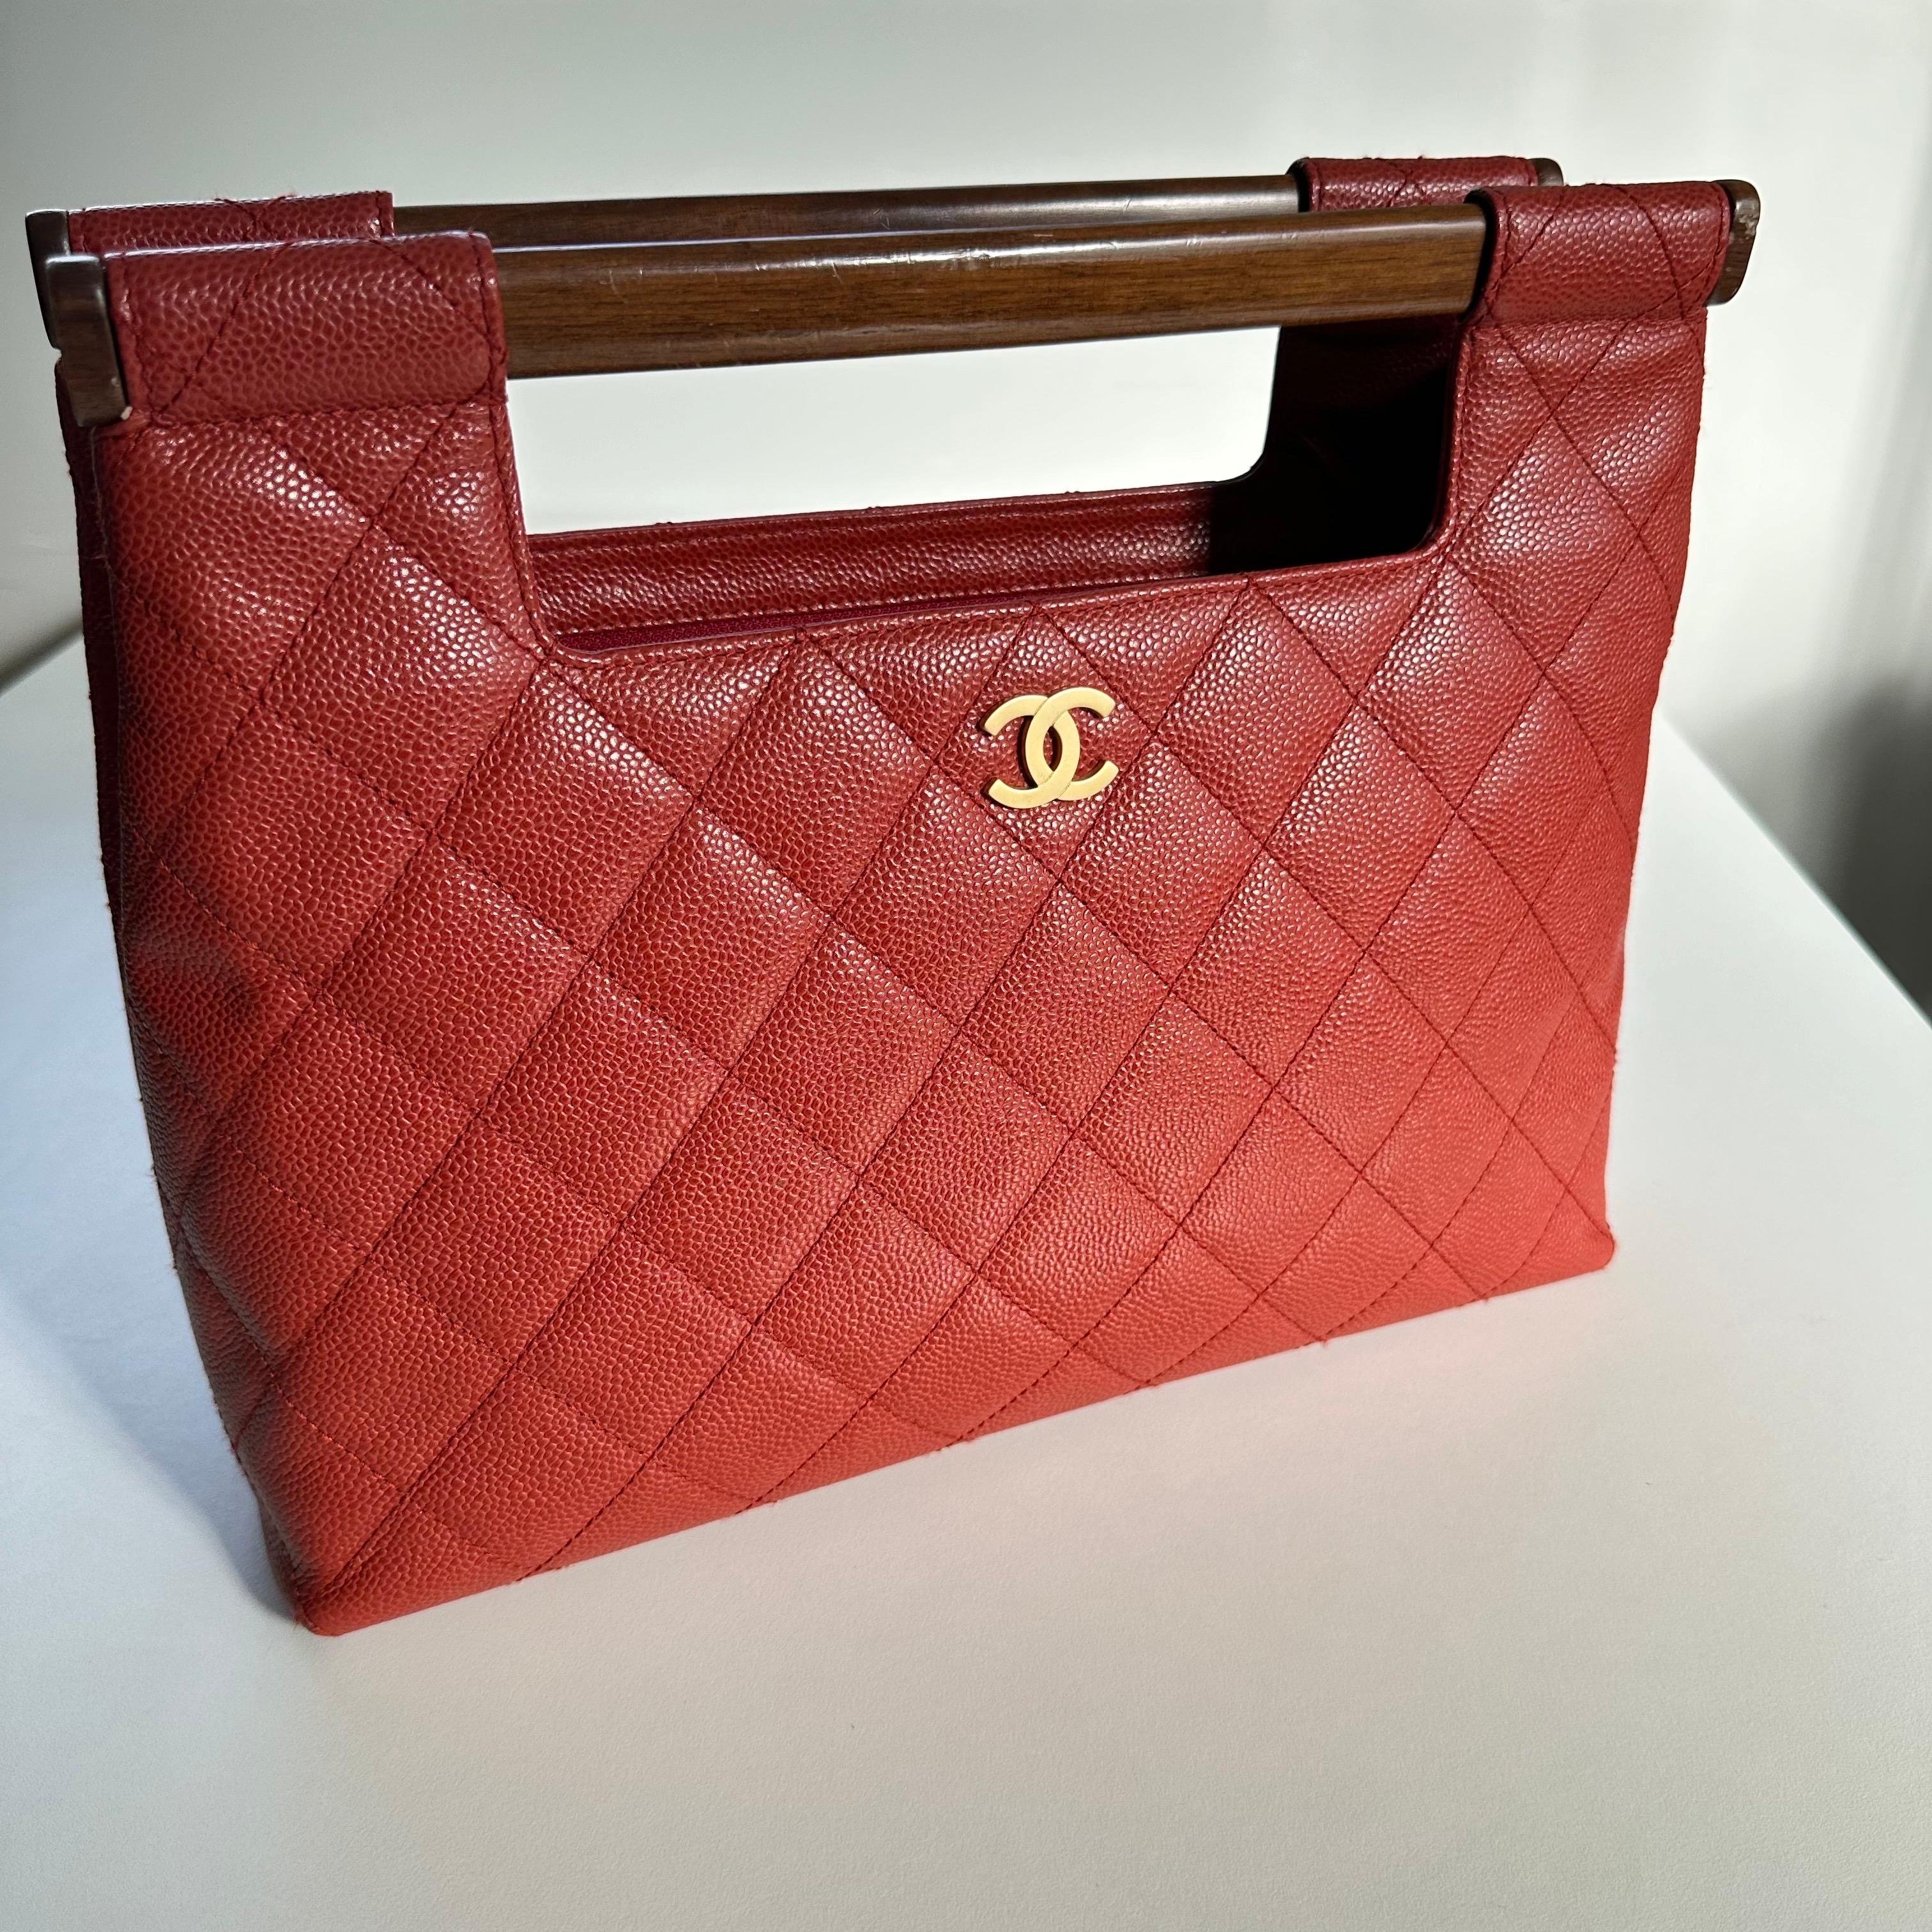 Chanel 2003 Holz Top Handle Rare Red Caviar Jumbo Kelly Envelope Clutch Tote Bag im Angebot 5